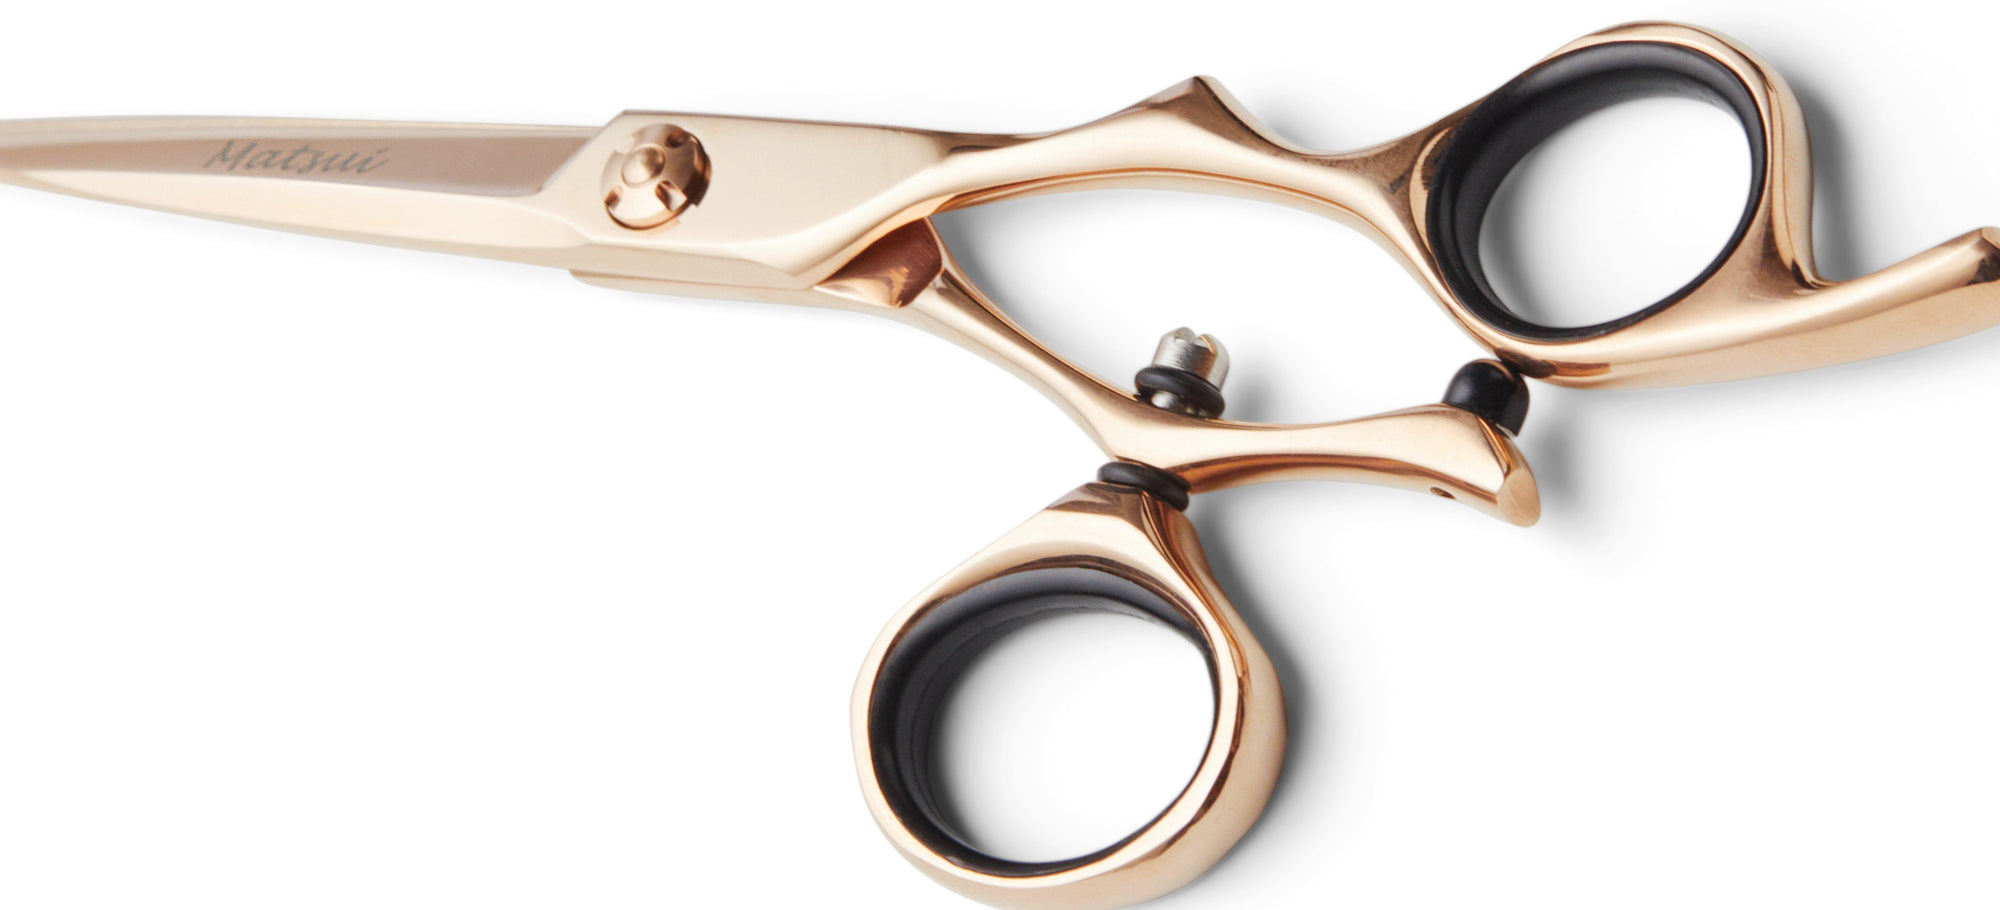 What Is The Maintenance For Swivel Scissors?